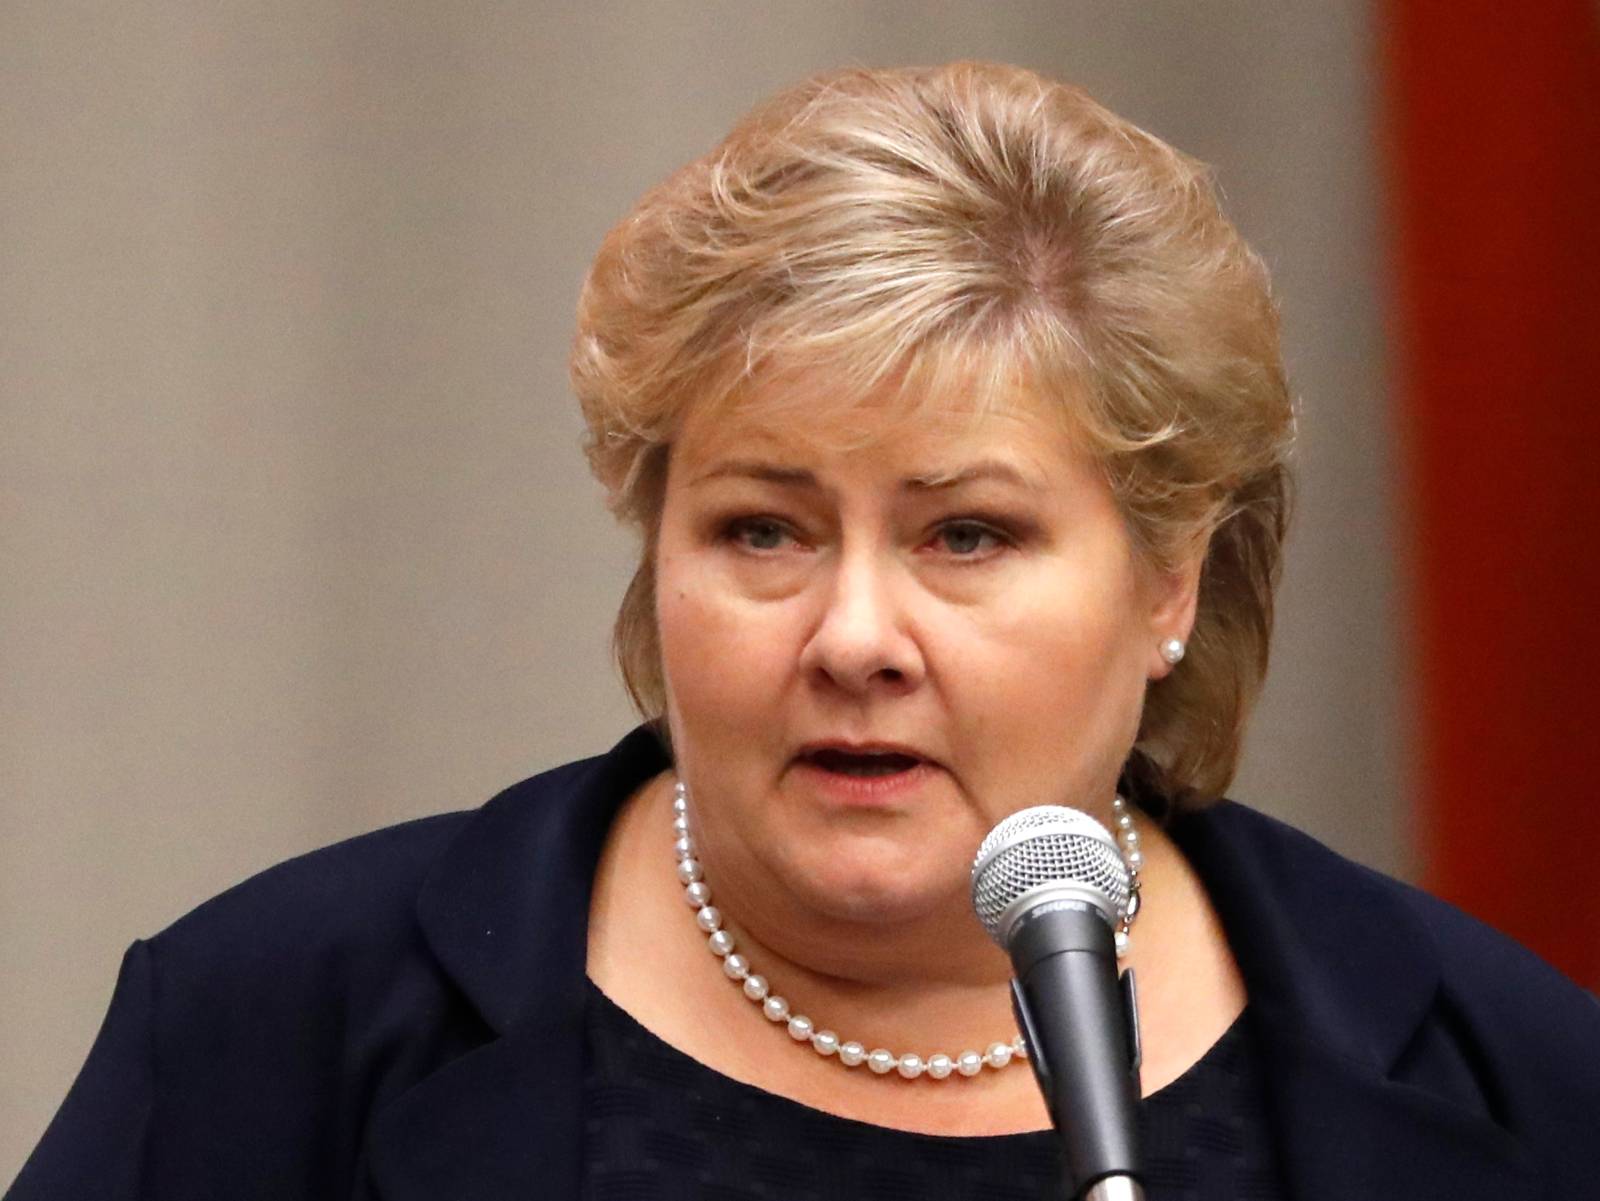 Prime Minister Erna Solberg of Norway speaks during a high-level meeting on addressing large movements of refugees and migrants at the United Nations General Assembly in New York on Sept. 19, 2016.